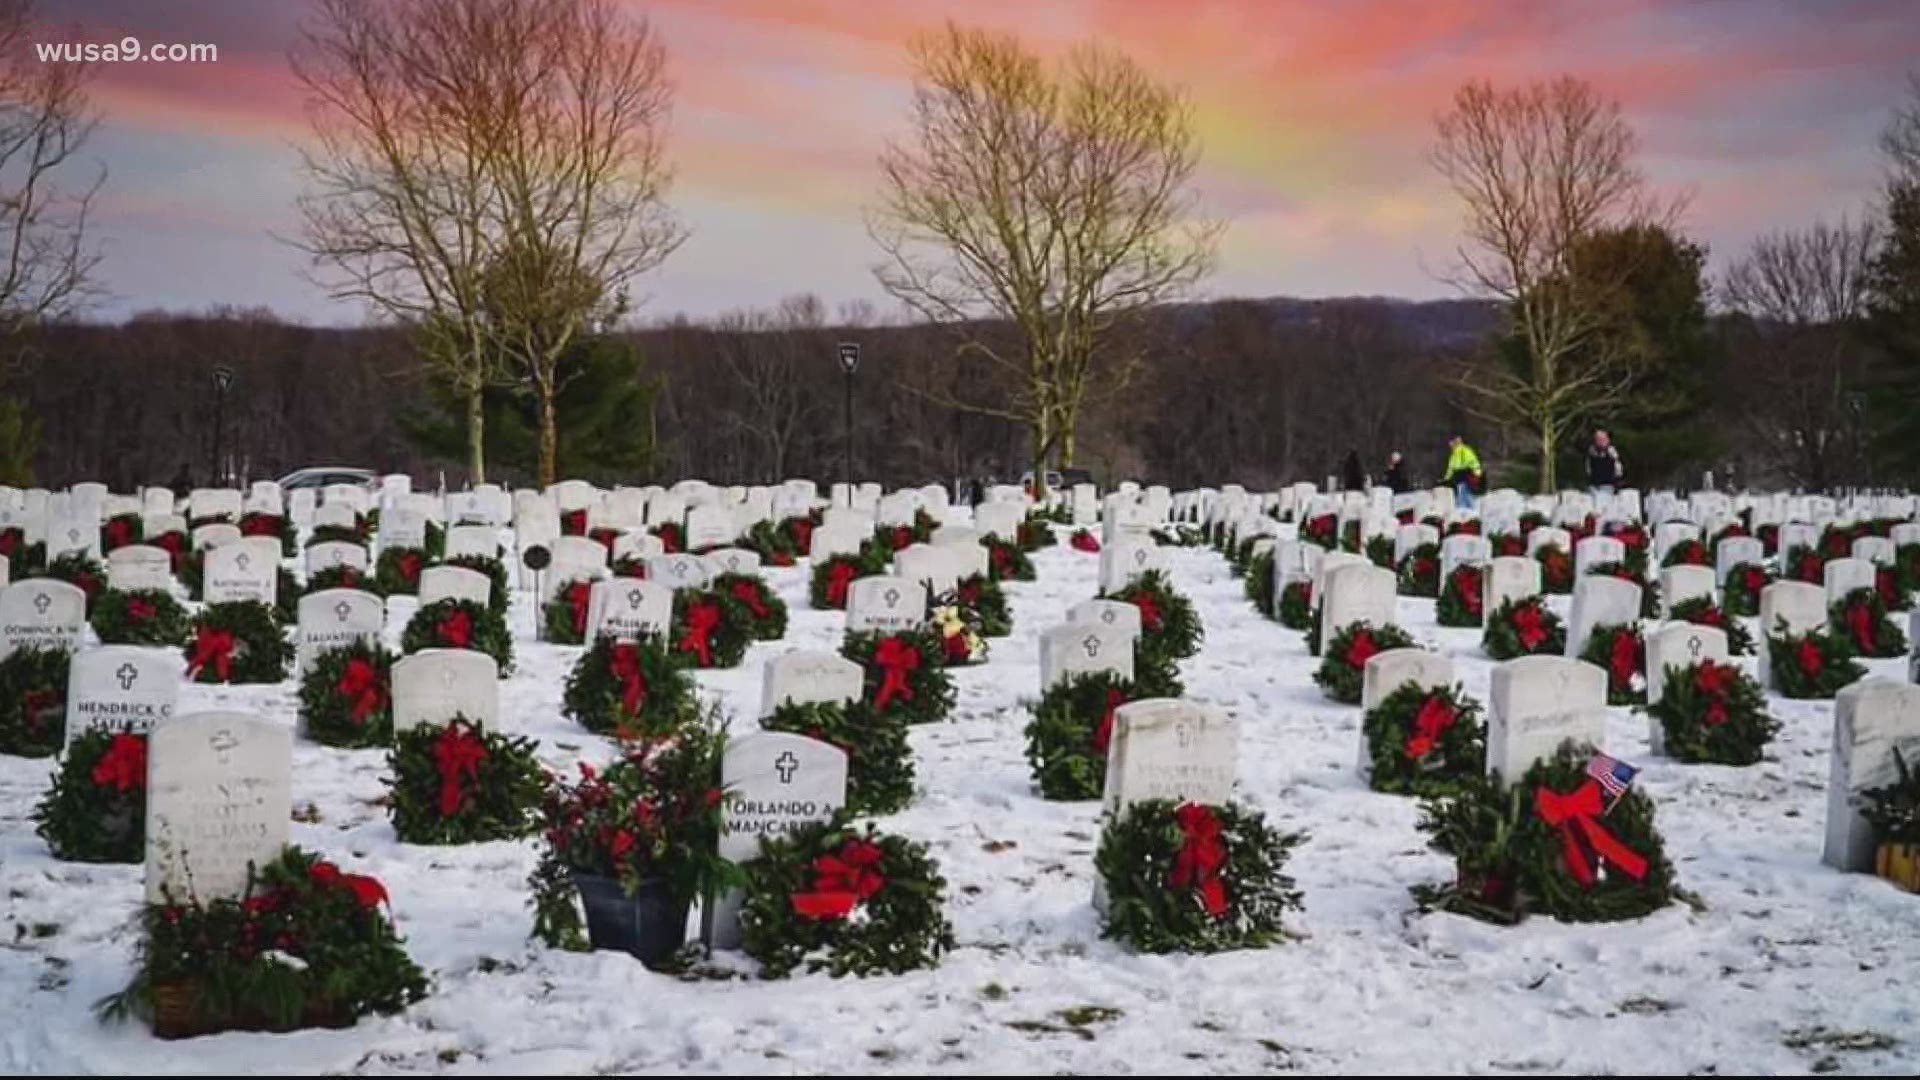 Wreaths were laid at Arlington National Cemetery and across the country Saturday.